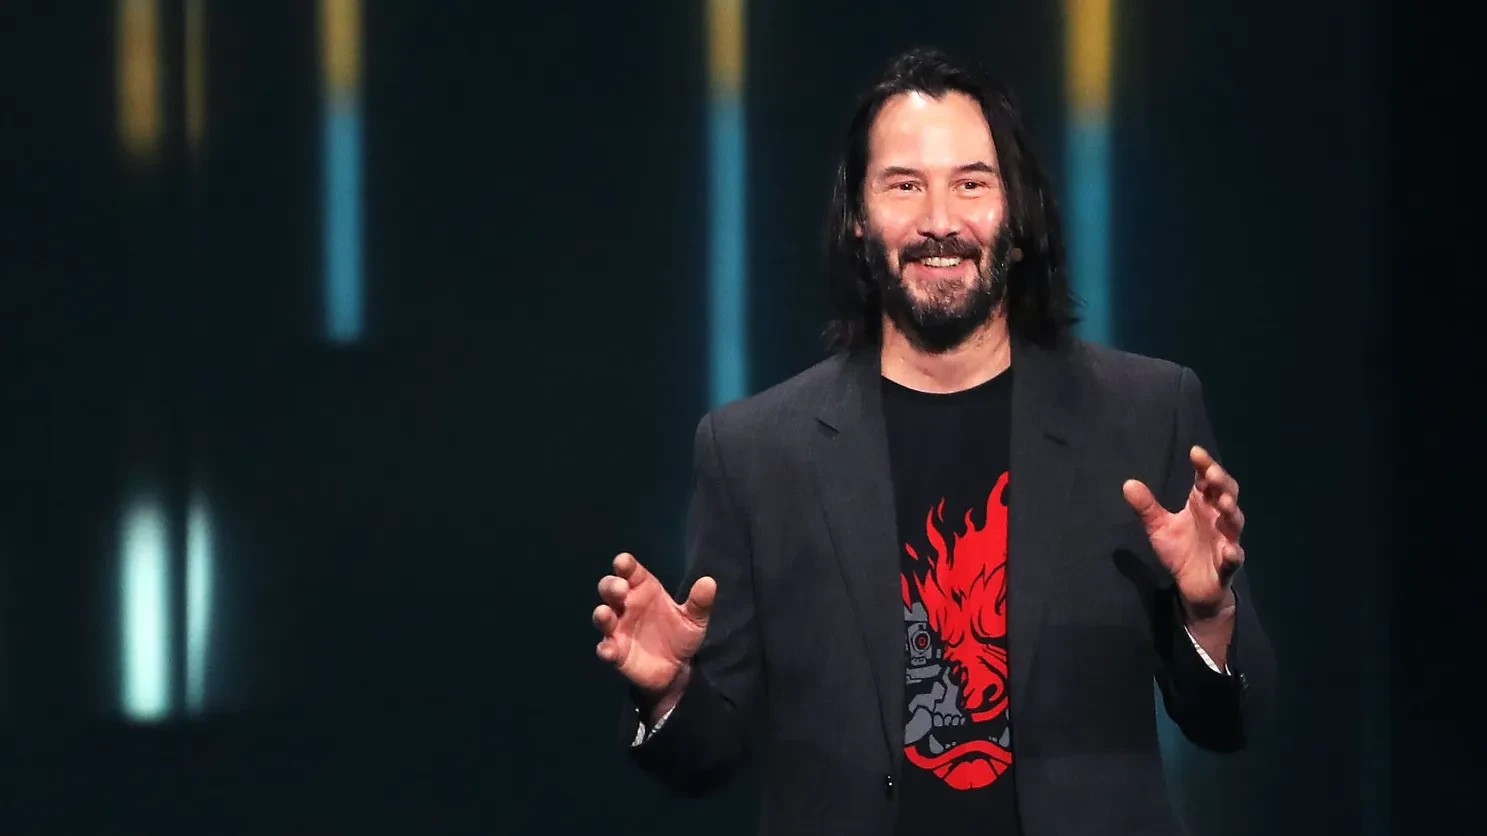 Keanu Reeves at E3 annoucing his role in Cyberpunk 2077 (2019).